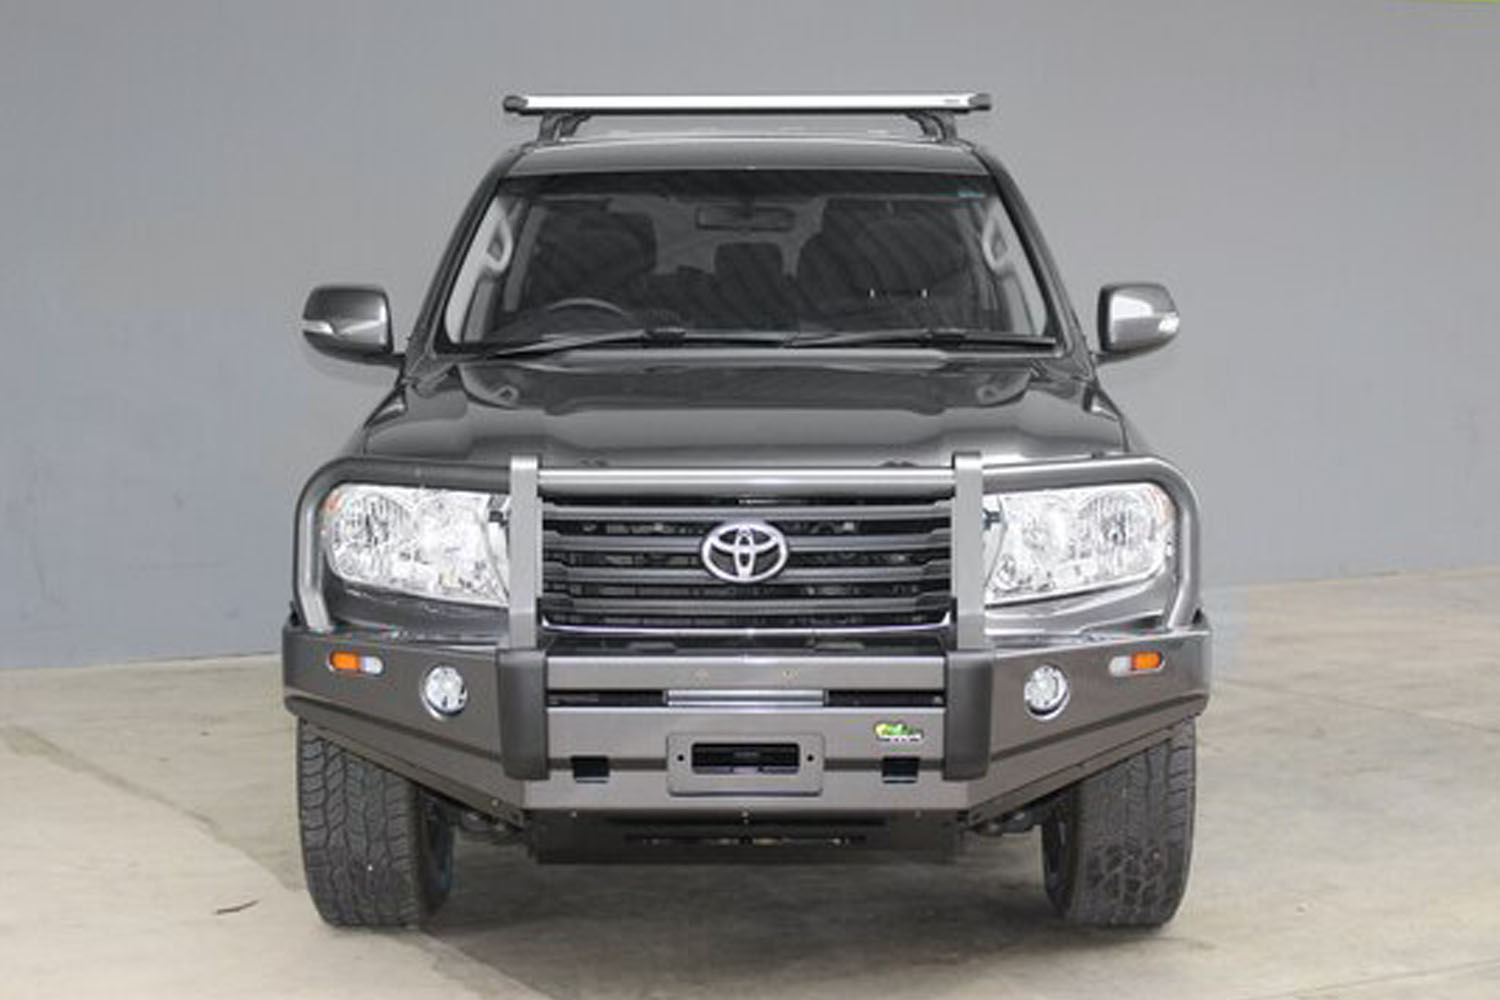 Premium Off Road Bumper Suited For 2012-15 Toyota 200 Series Land Cruiser / Lexus LX570 Questions & Answers